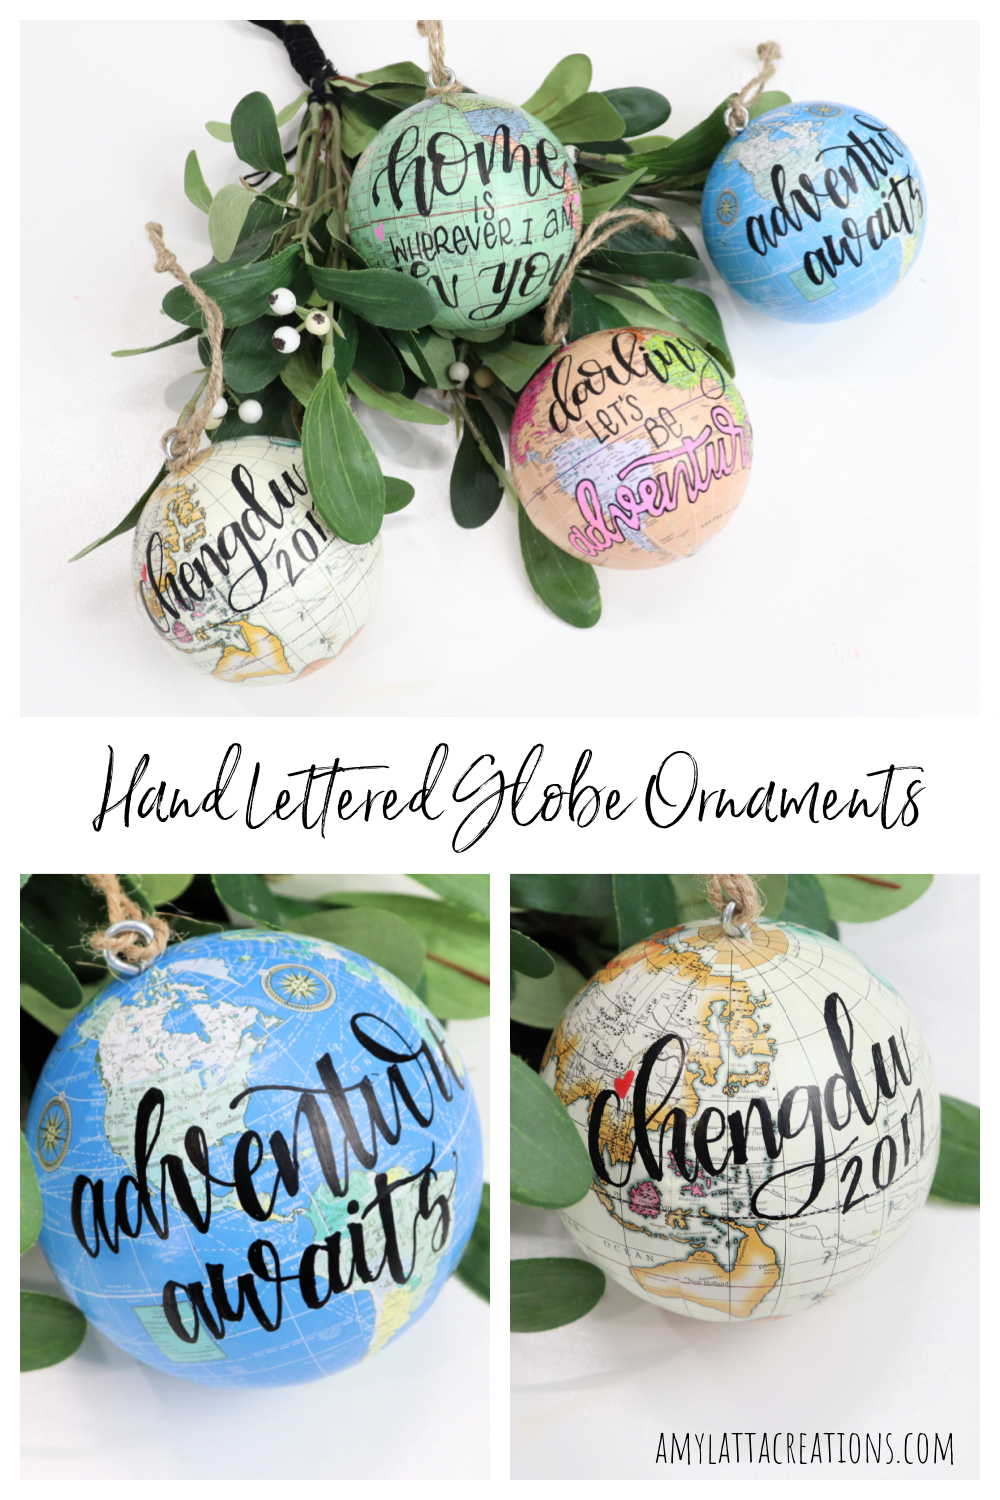 Image is a collage of hand lettered globe ornaments.